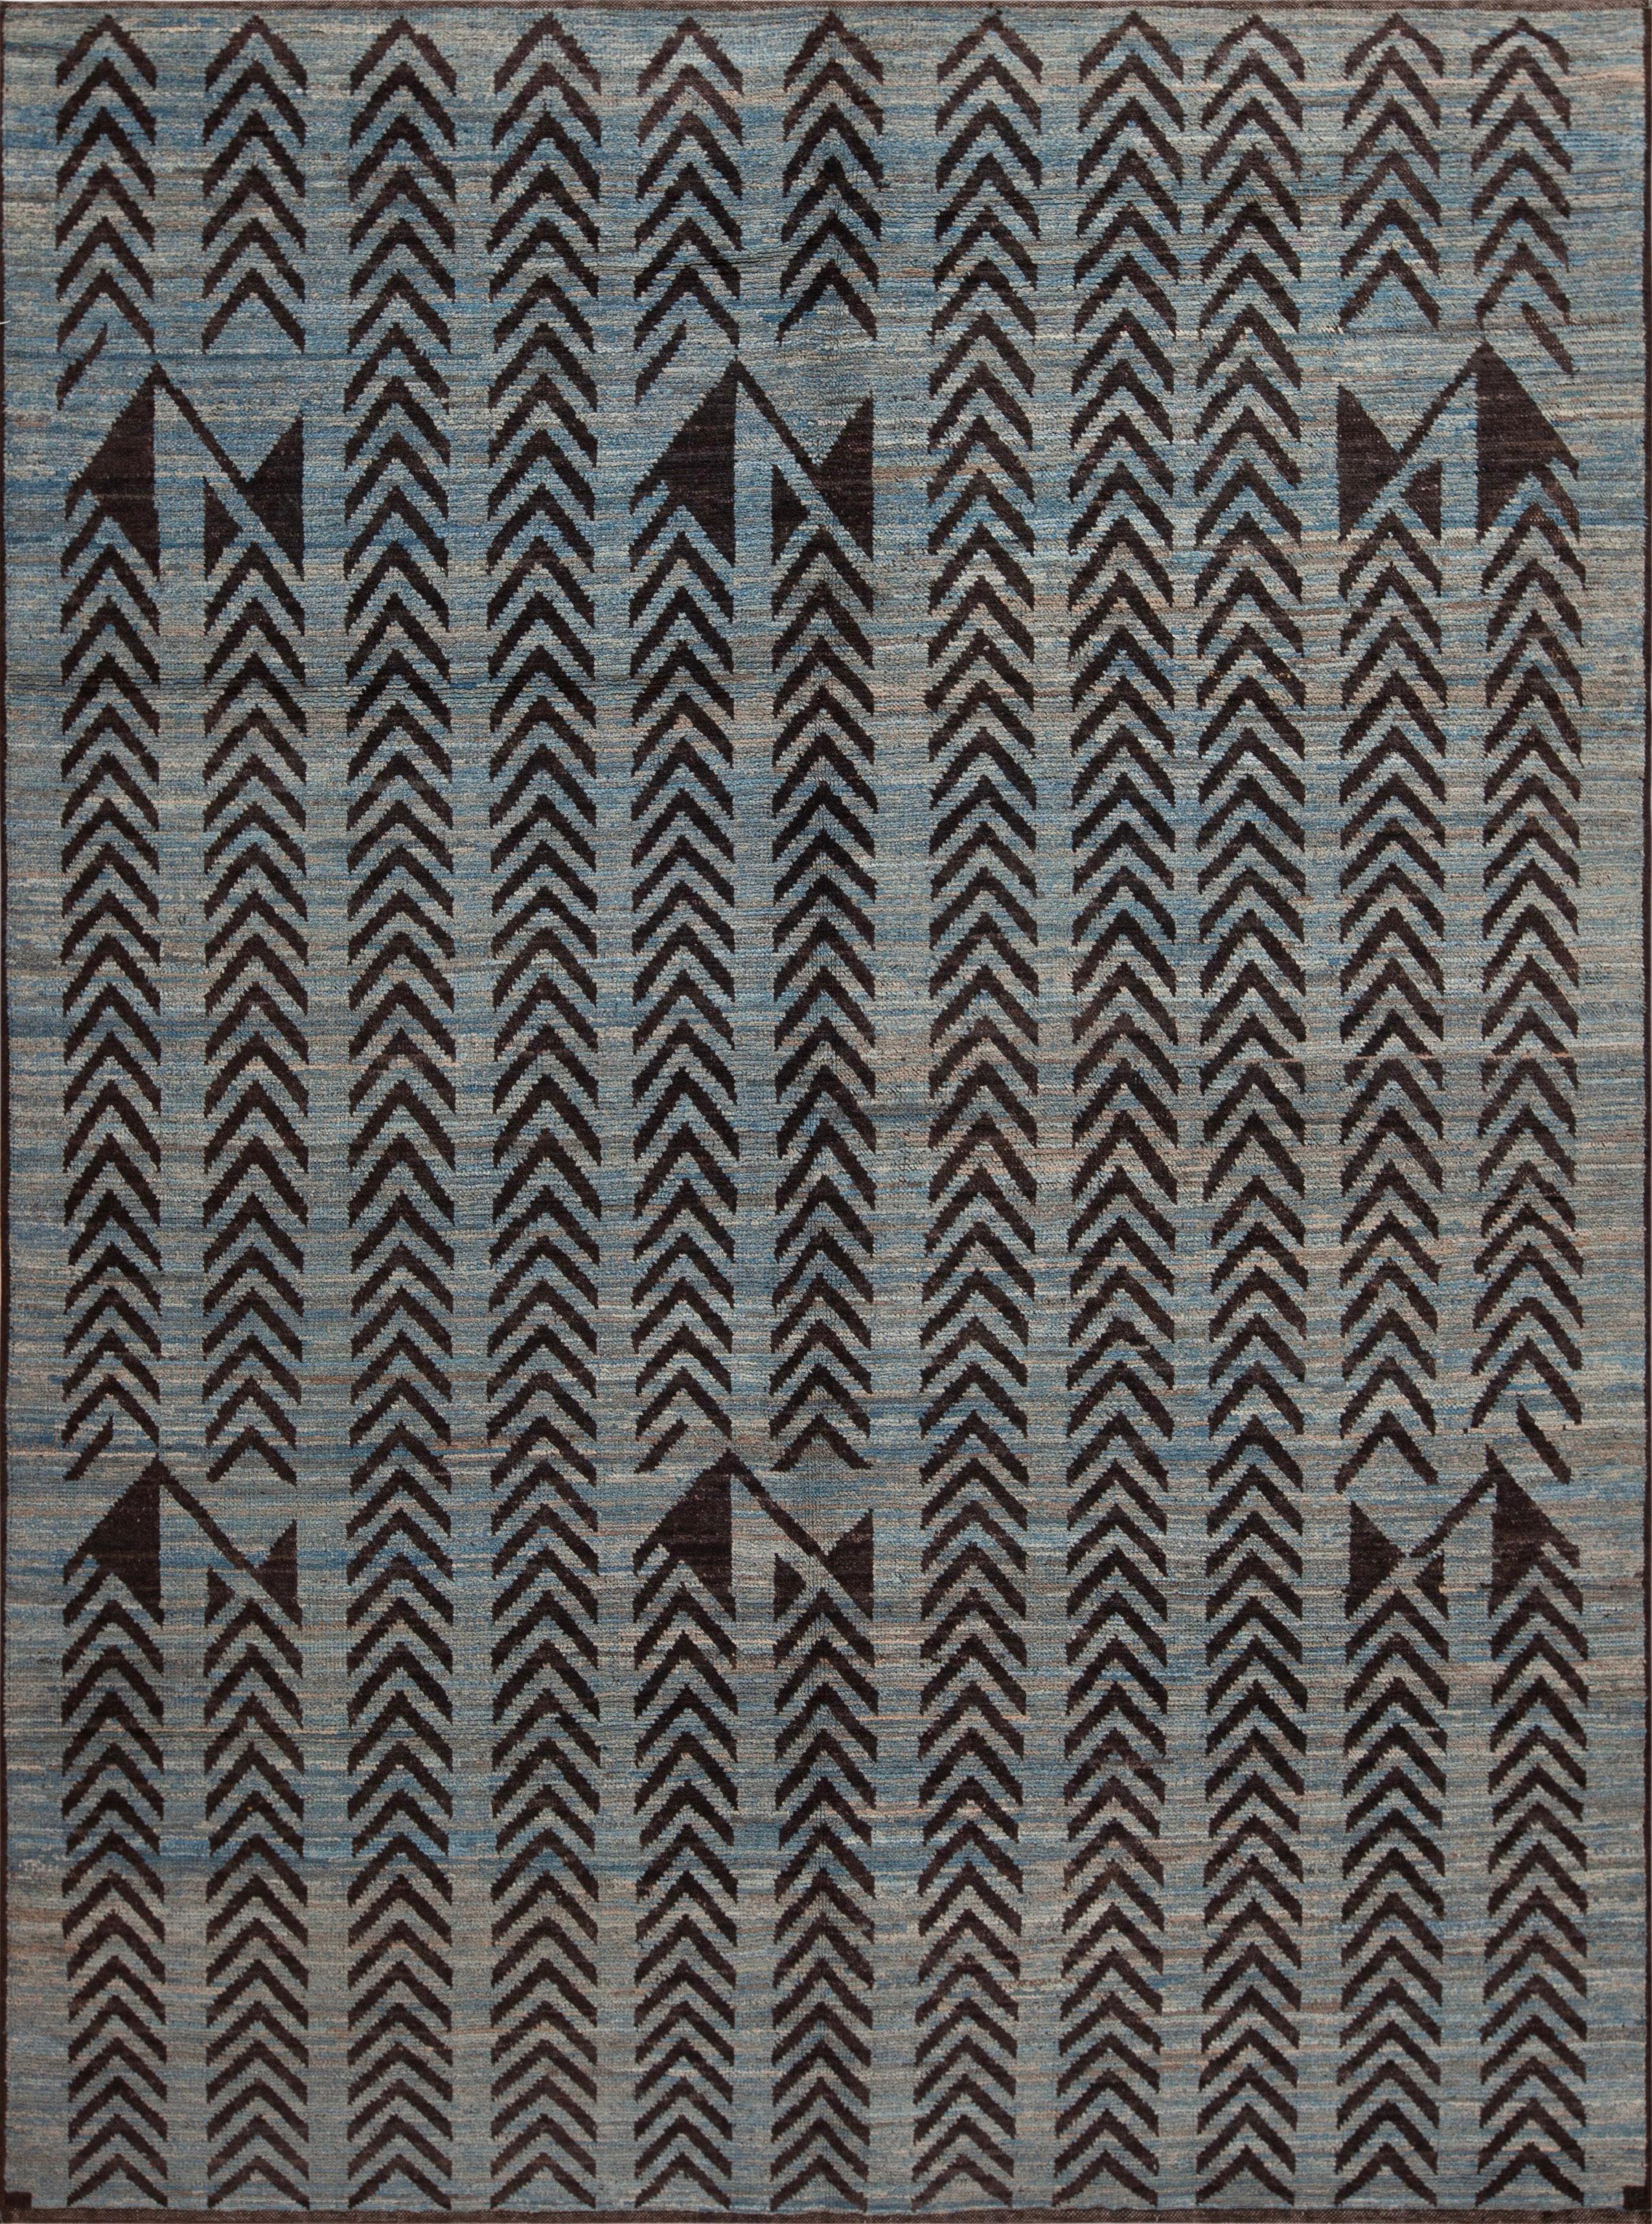 Nazmiyal Collection Light Blue Charcoal Tribal Geometric Pattern Rug 7' x 9'3" For Sale